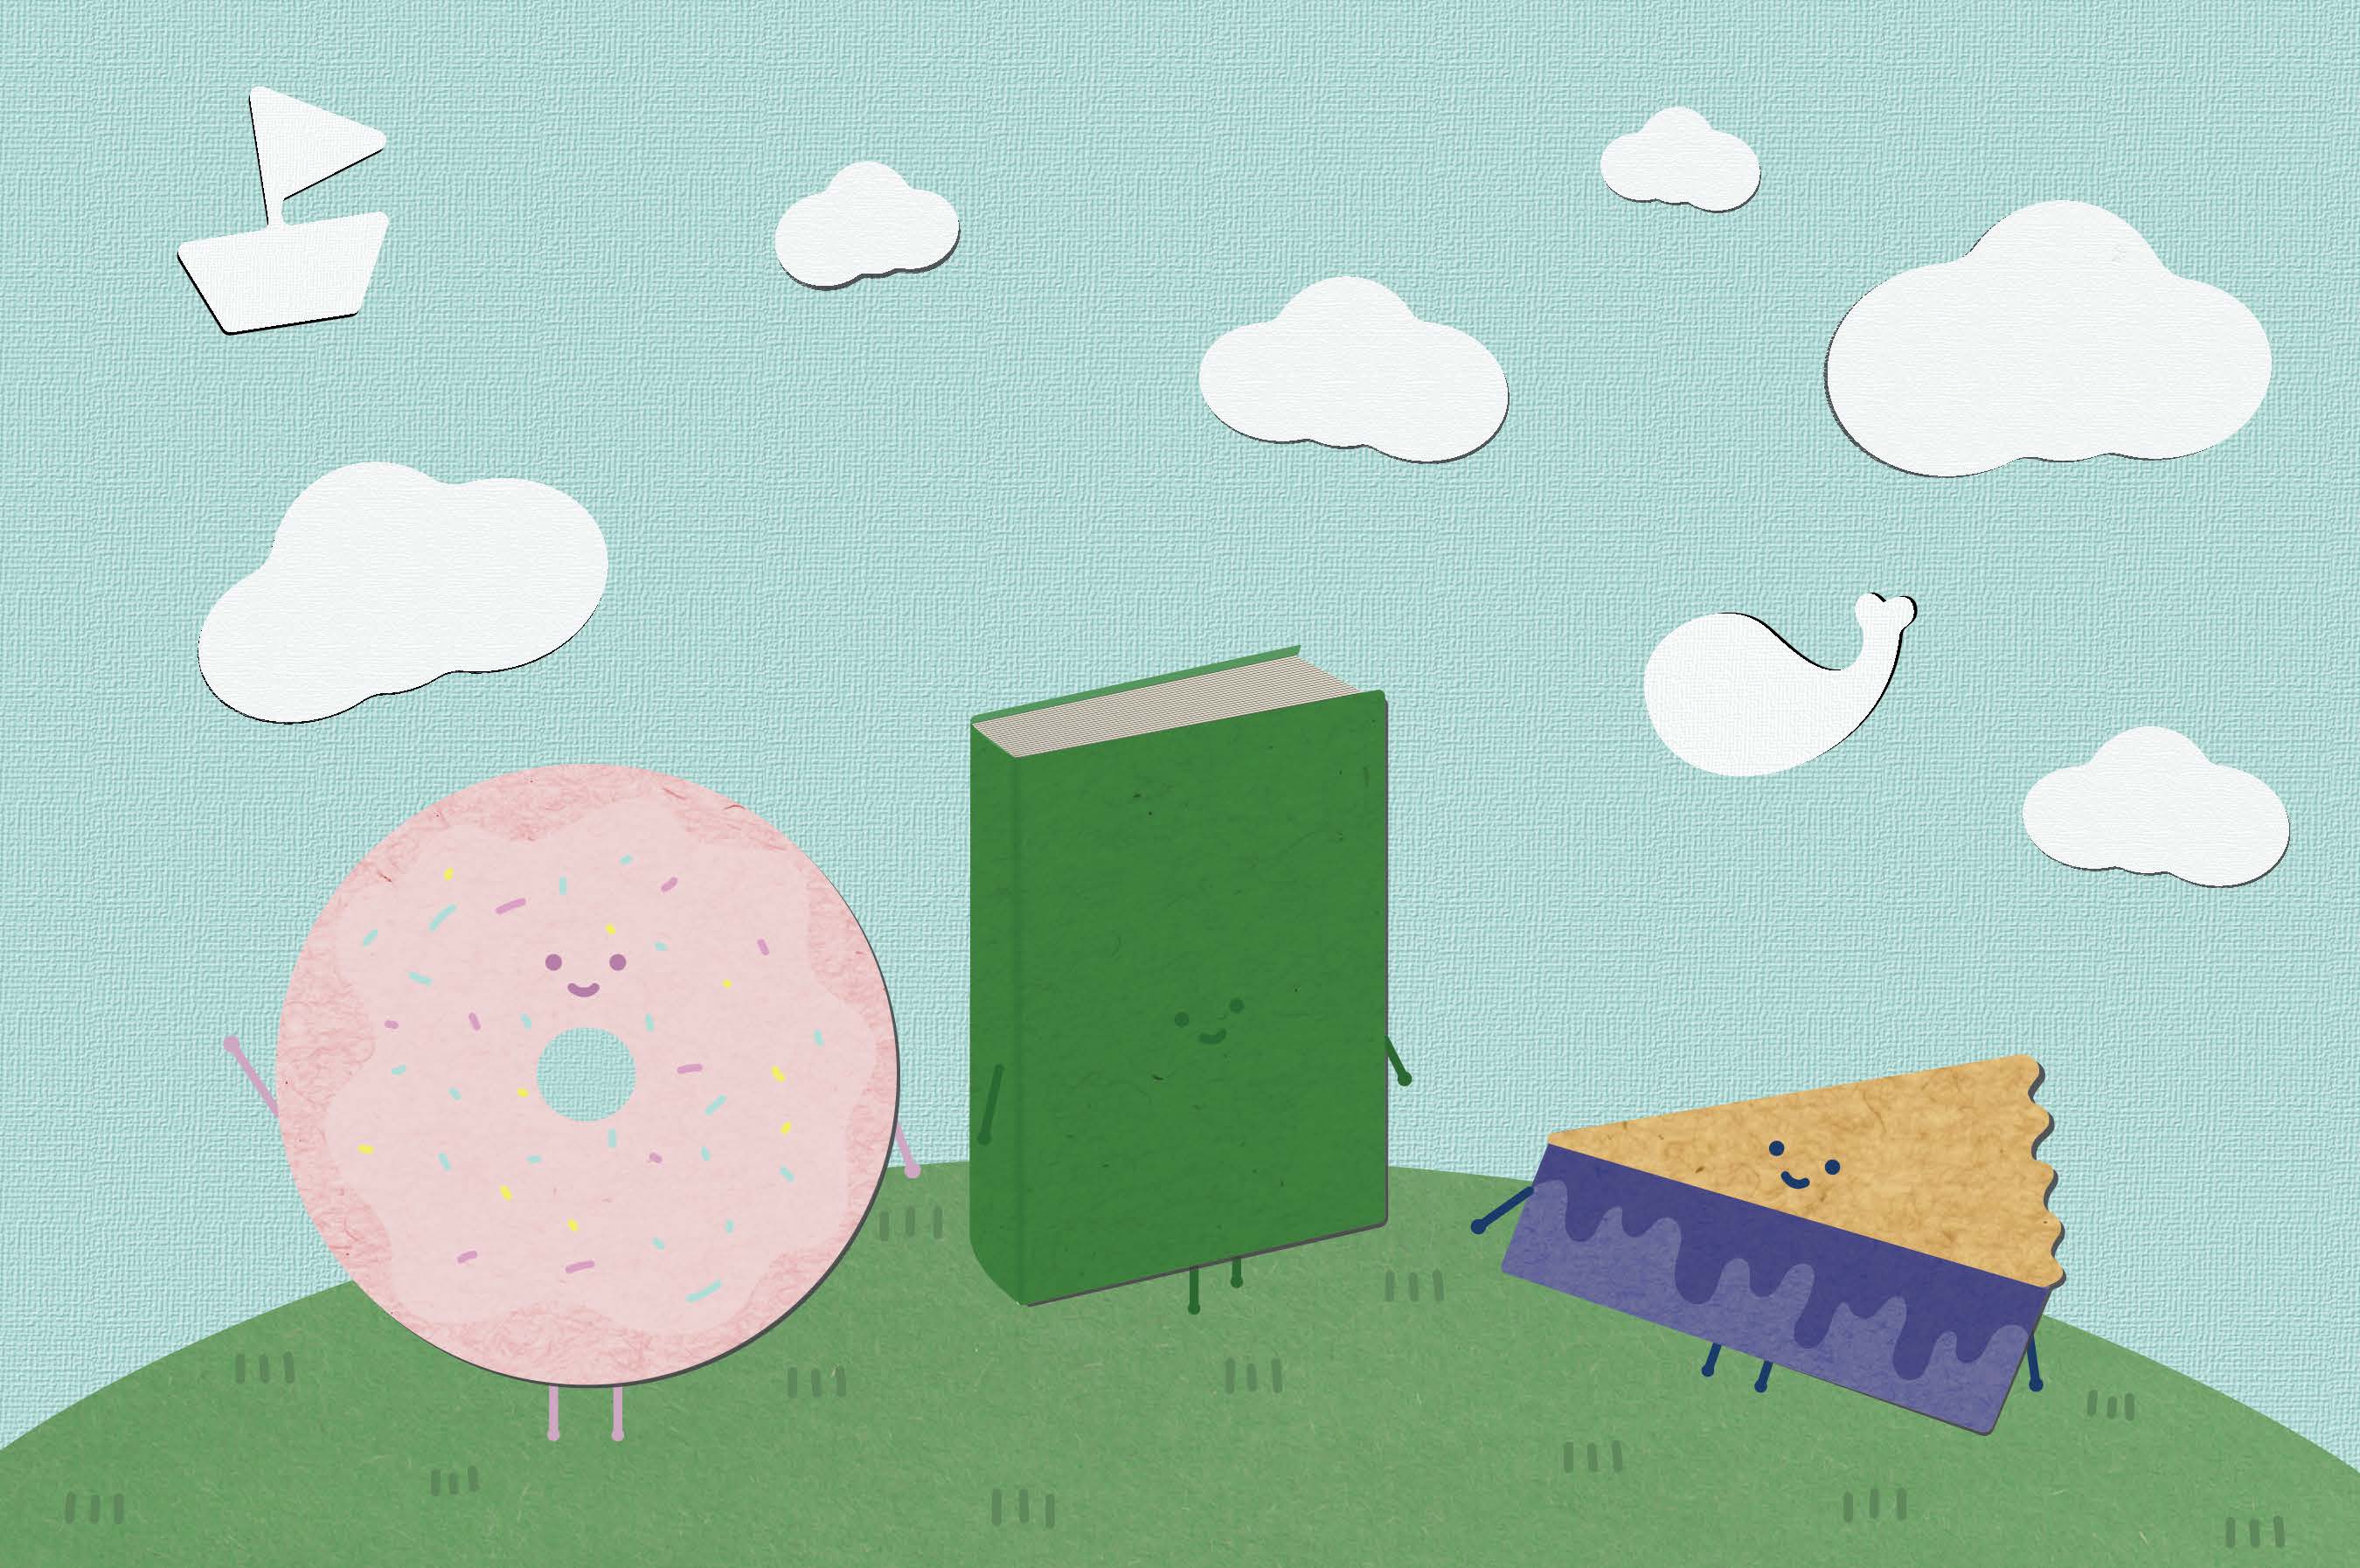 Image is an imaginative illustration of a donut, a book, and a piece of pie all with little arms and faces standing on a hilltop together, gazing at creatively-shaped clouds.